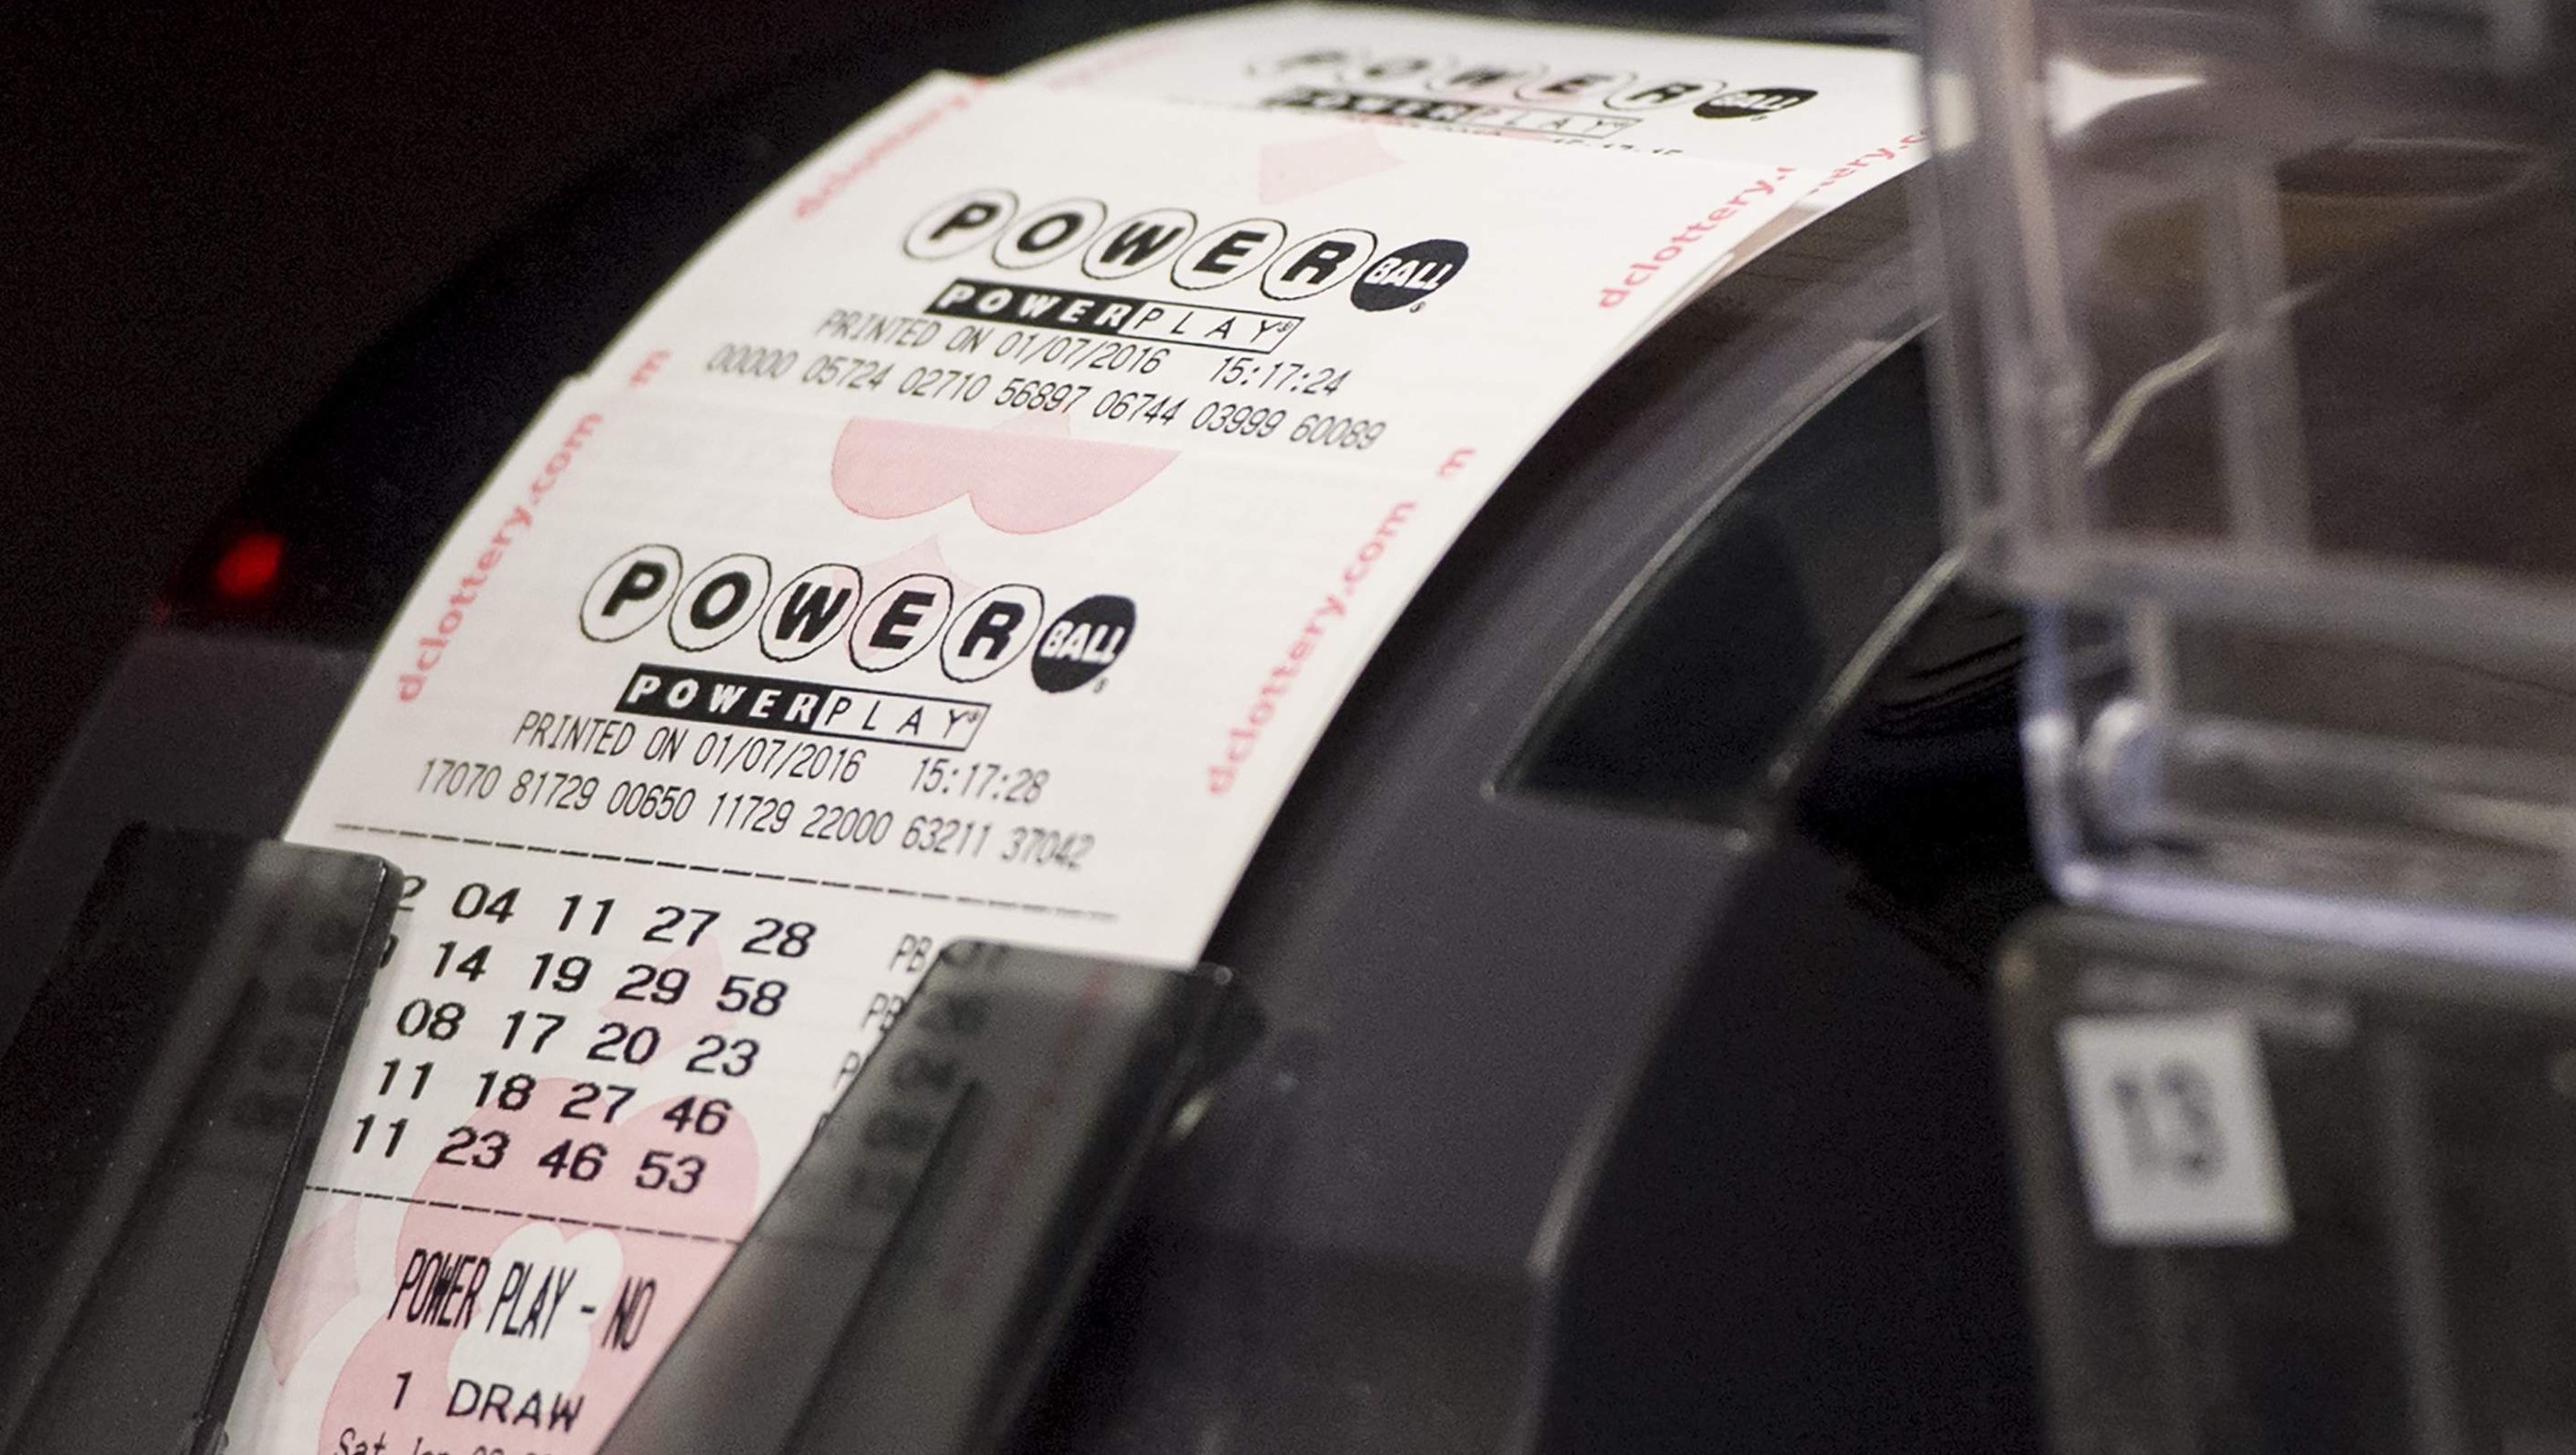 Powerball Channel What TV Station Is the Drawing on Tonight?